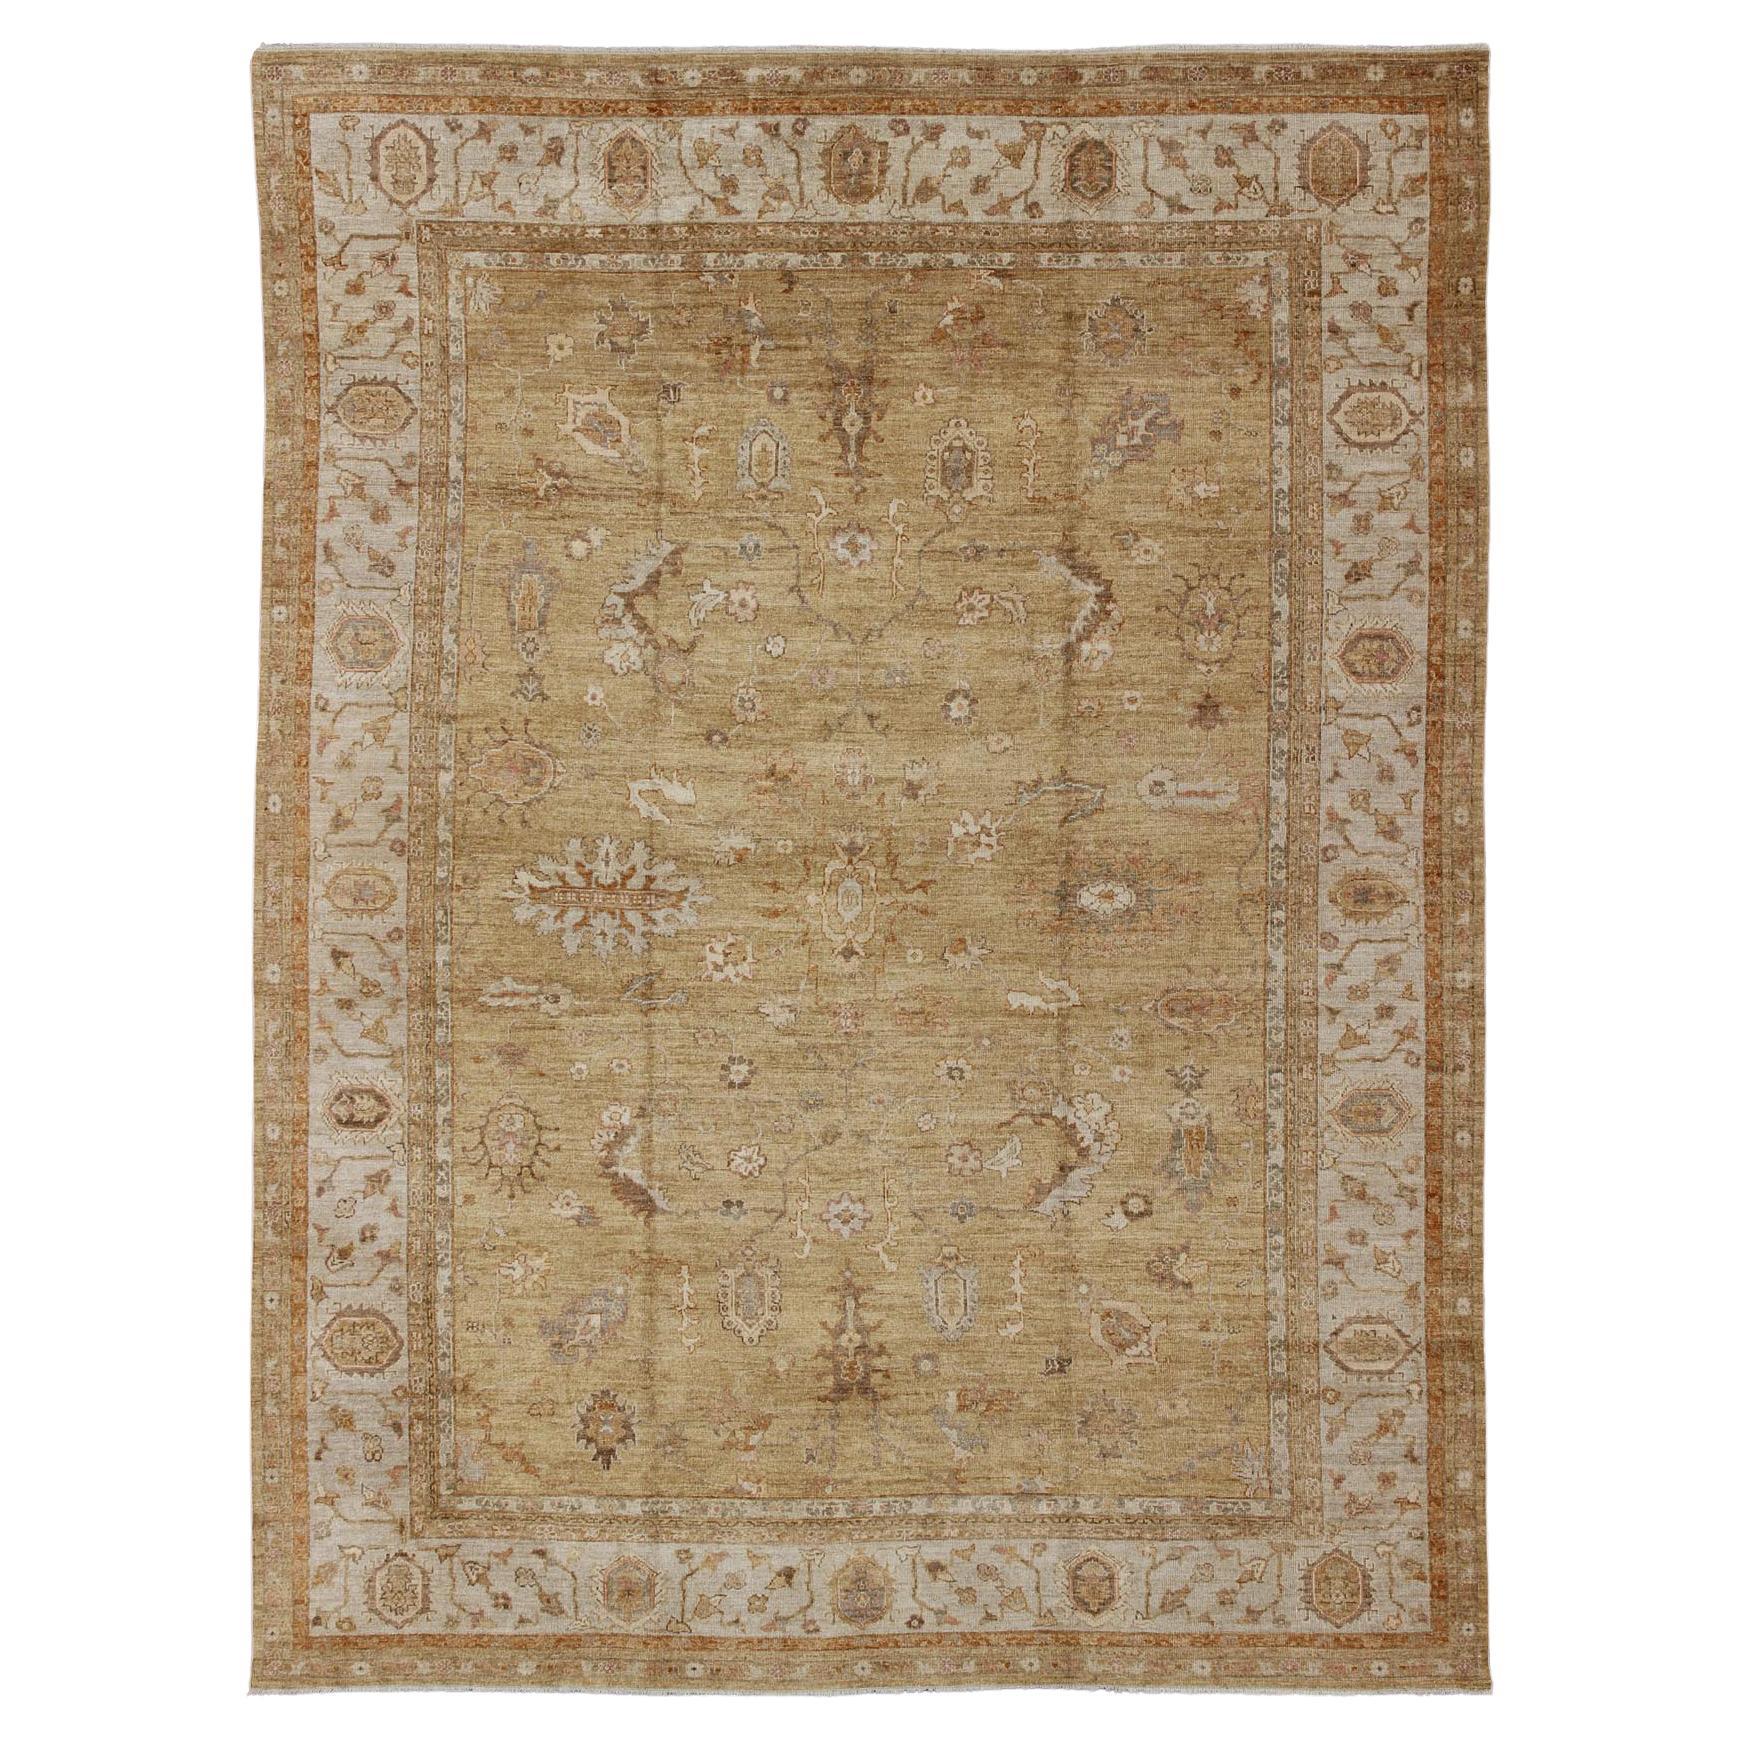 Large Angora Oushak Turkish Rug in Warm Colors of Taupe, Soft Gold, Brown, Cream For Sale